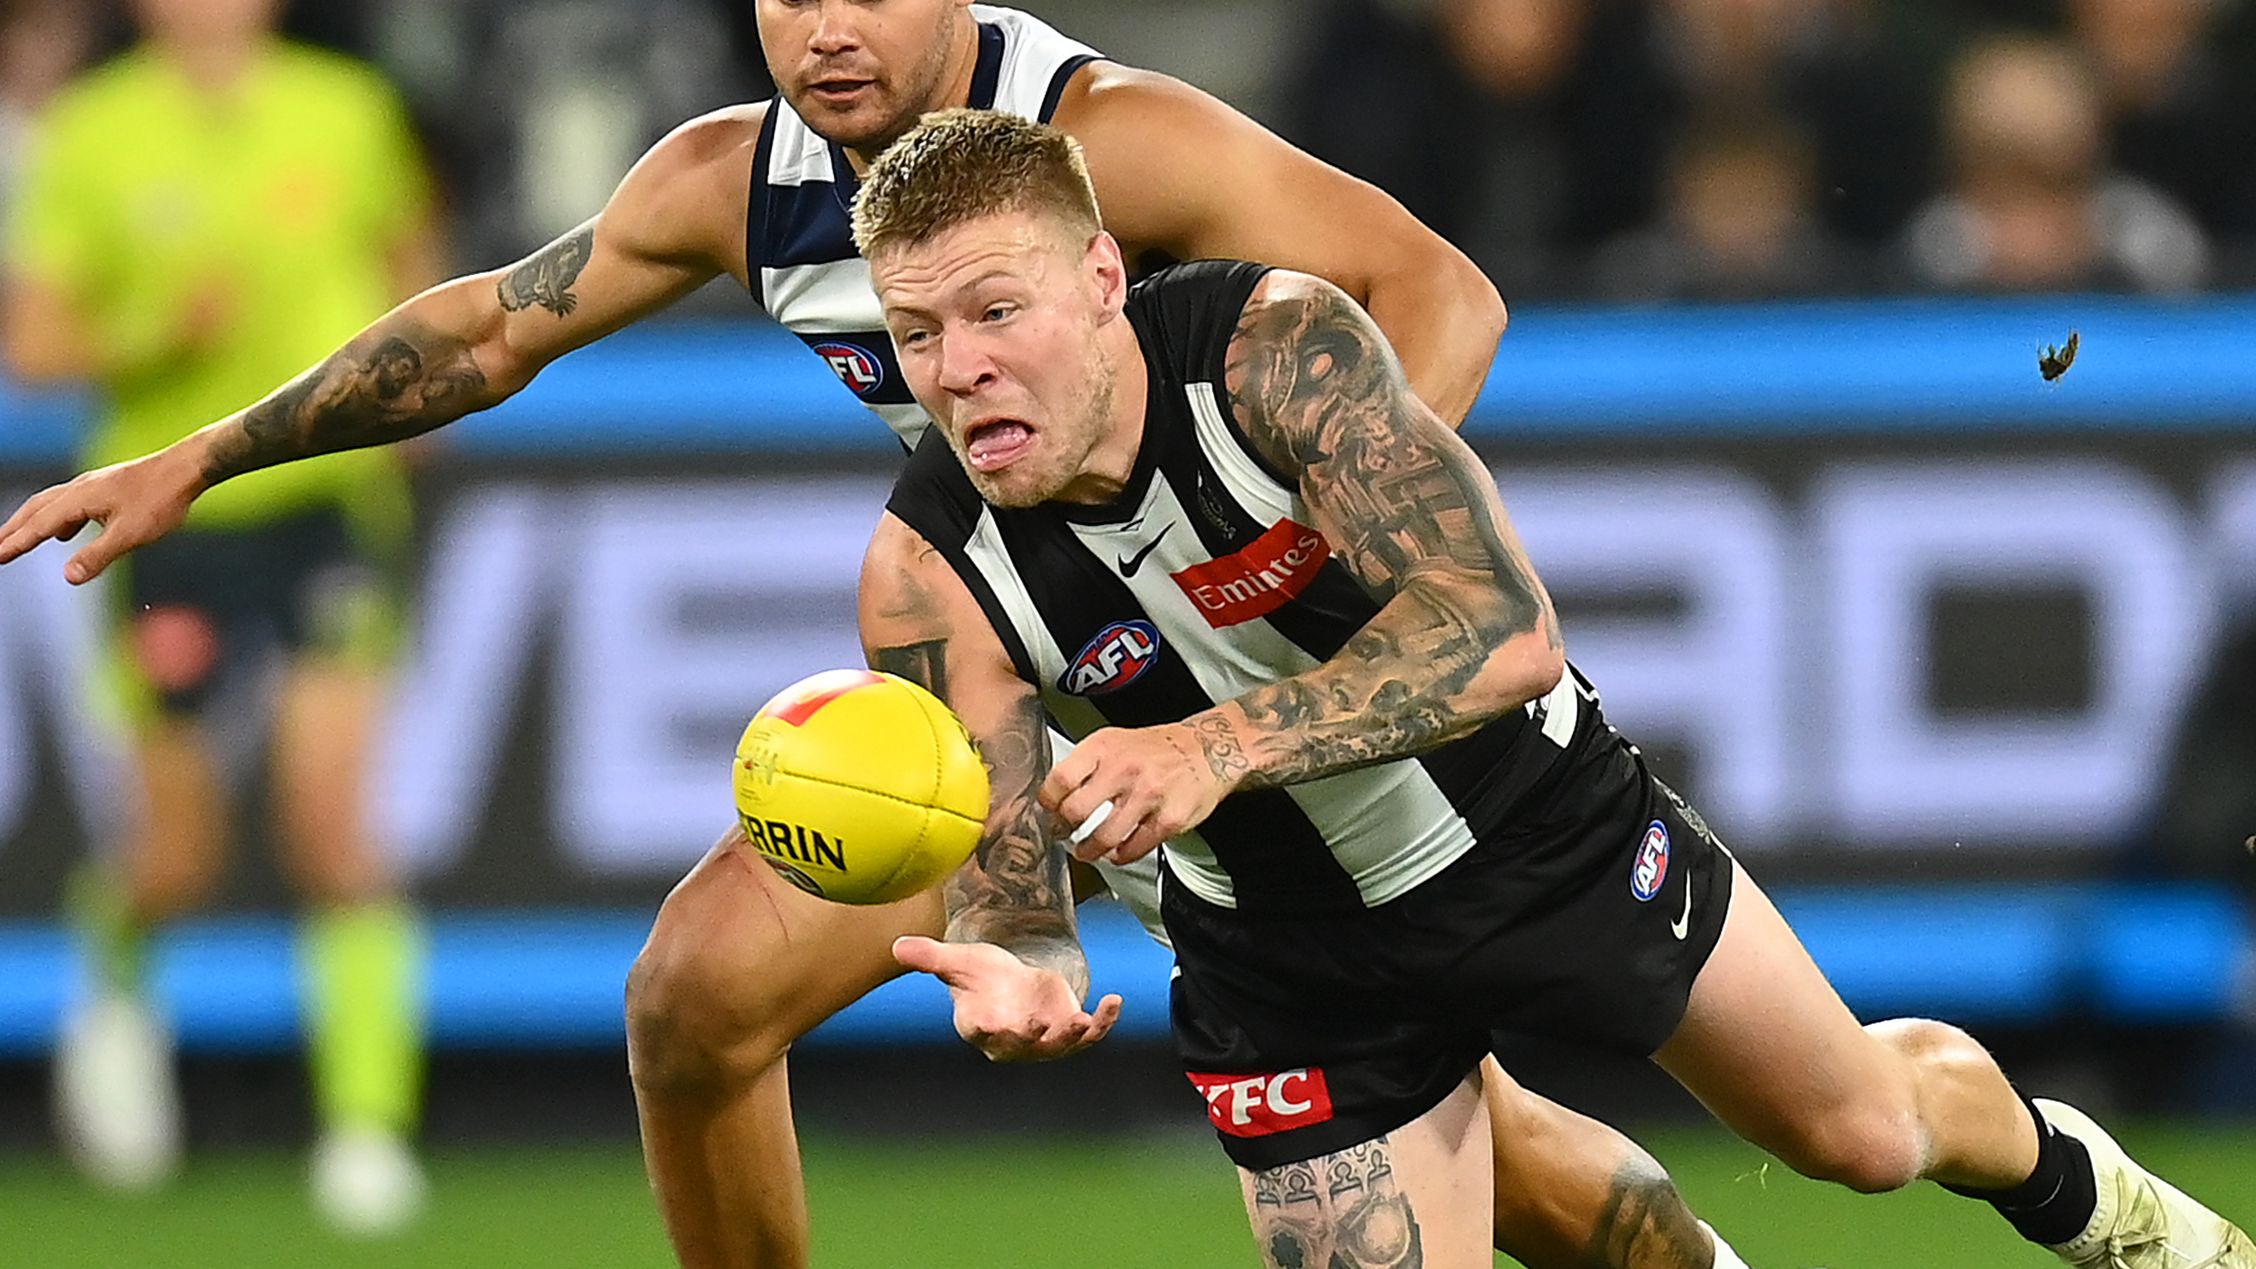 Magpies confirm $3.2 million Jordan De Goey extension 'on hold' amid Bali video scandal